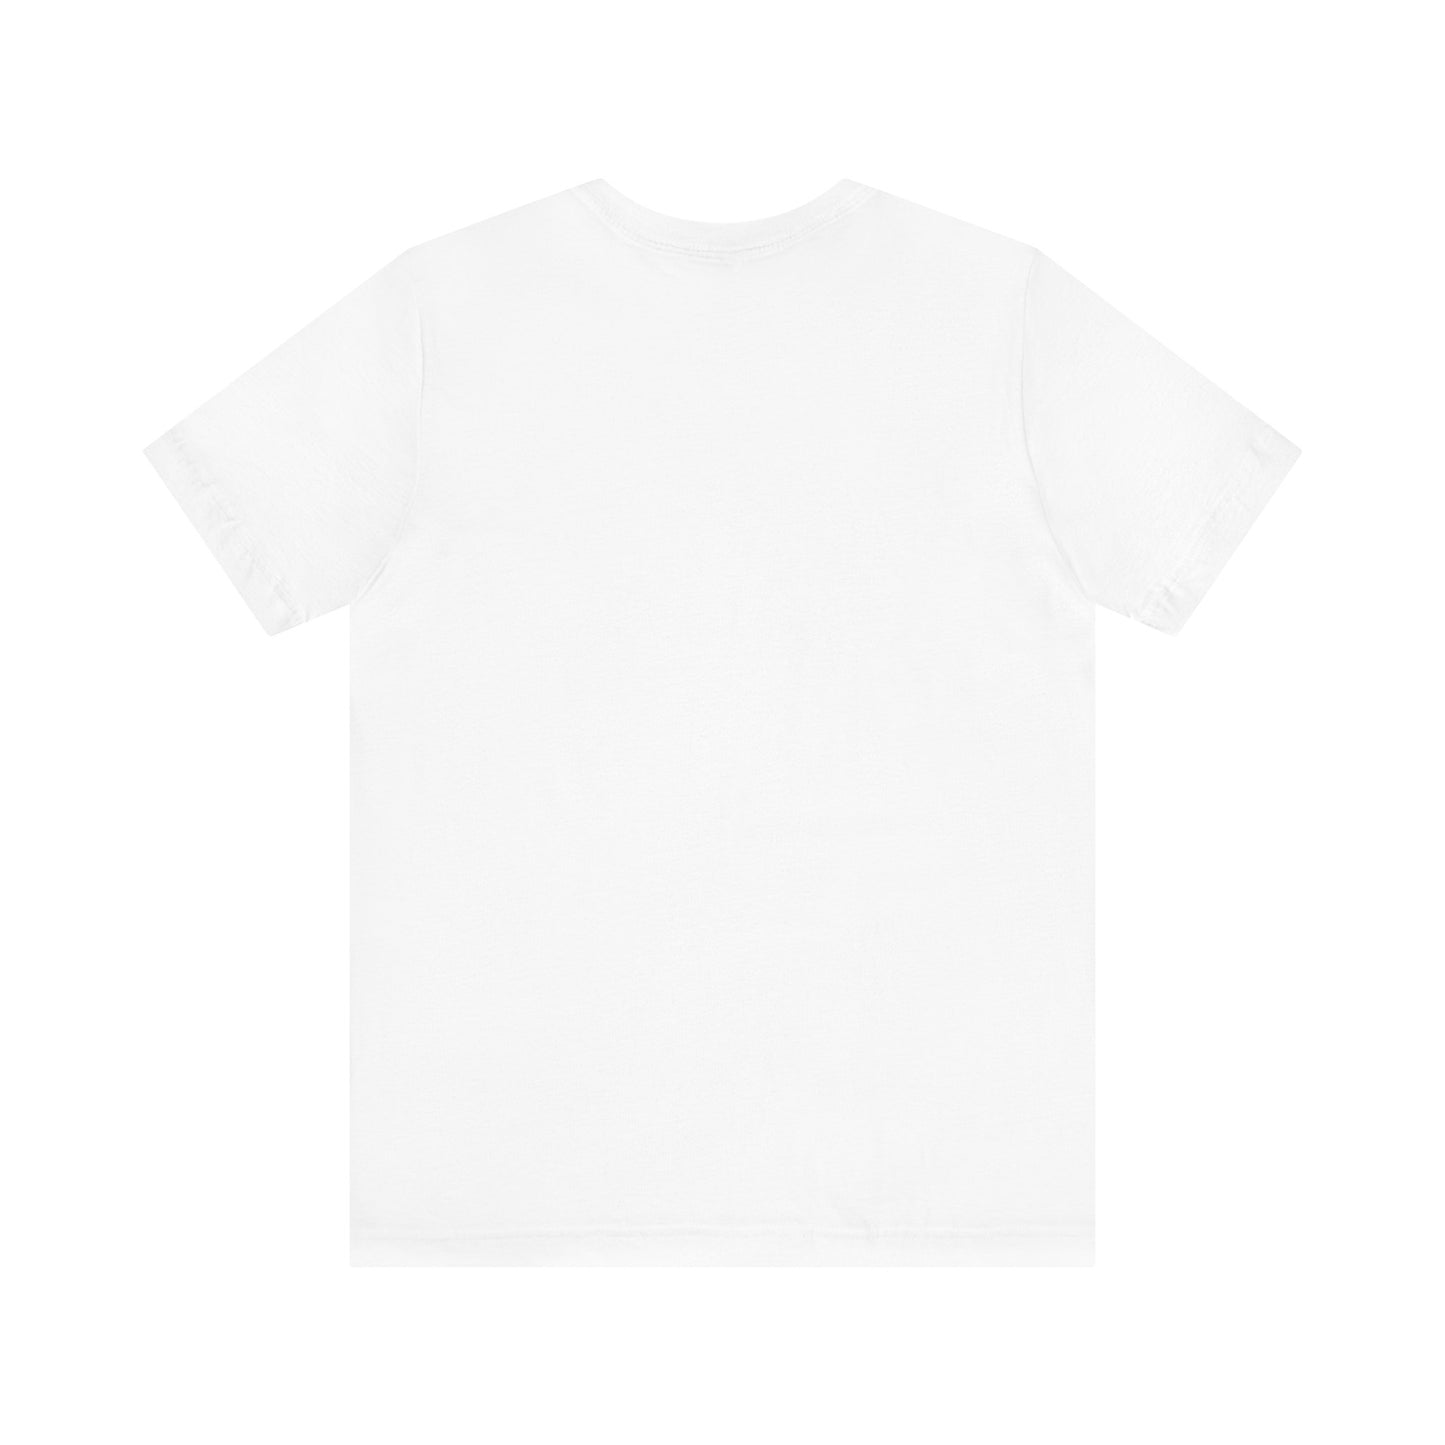 A.............rainbow WHITE  (representing the Covenant) GGG Unisex Jersey Short Sleeve Tee